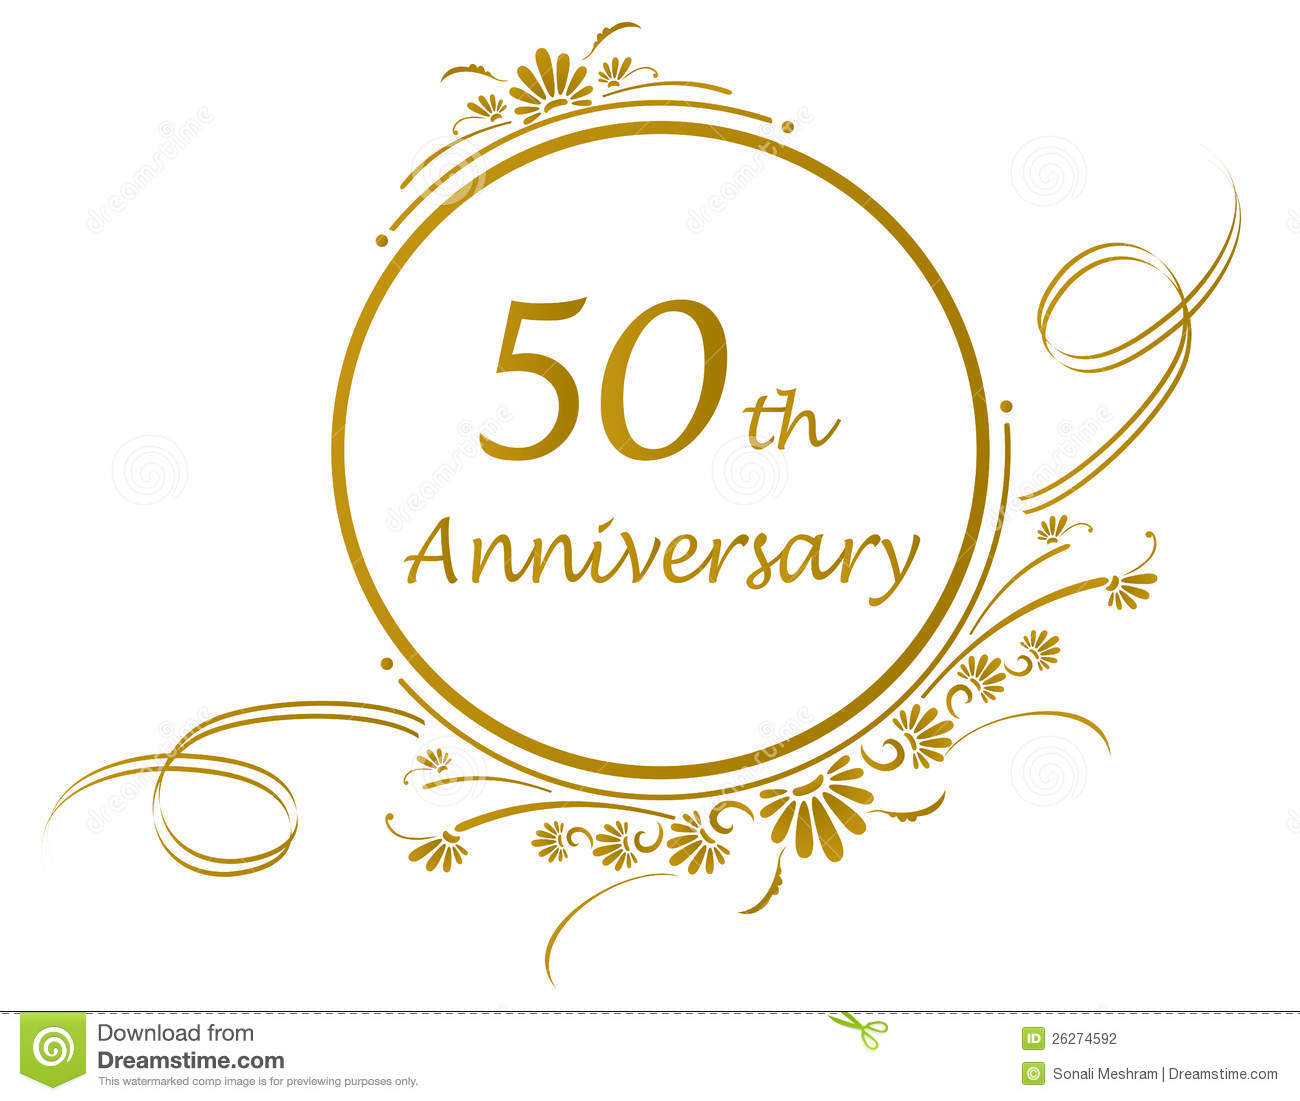 50th Or Golden Anniversary Of A Marriage Or Business Vector Available